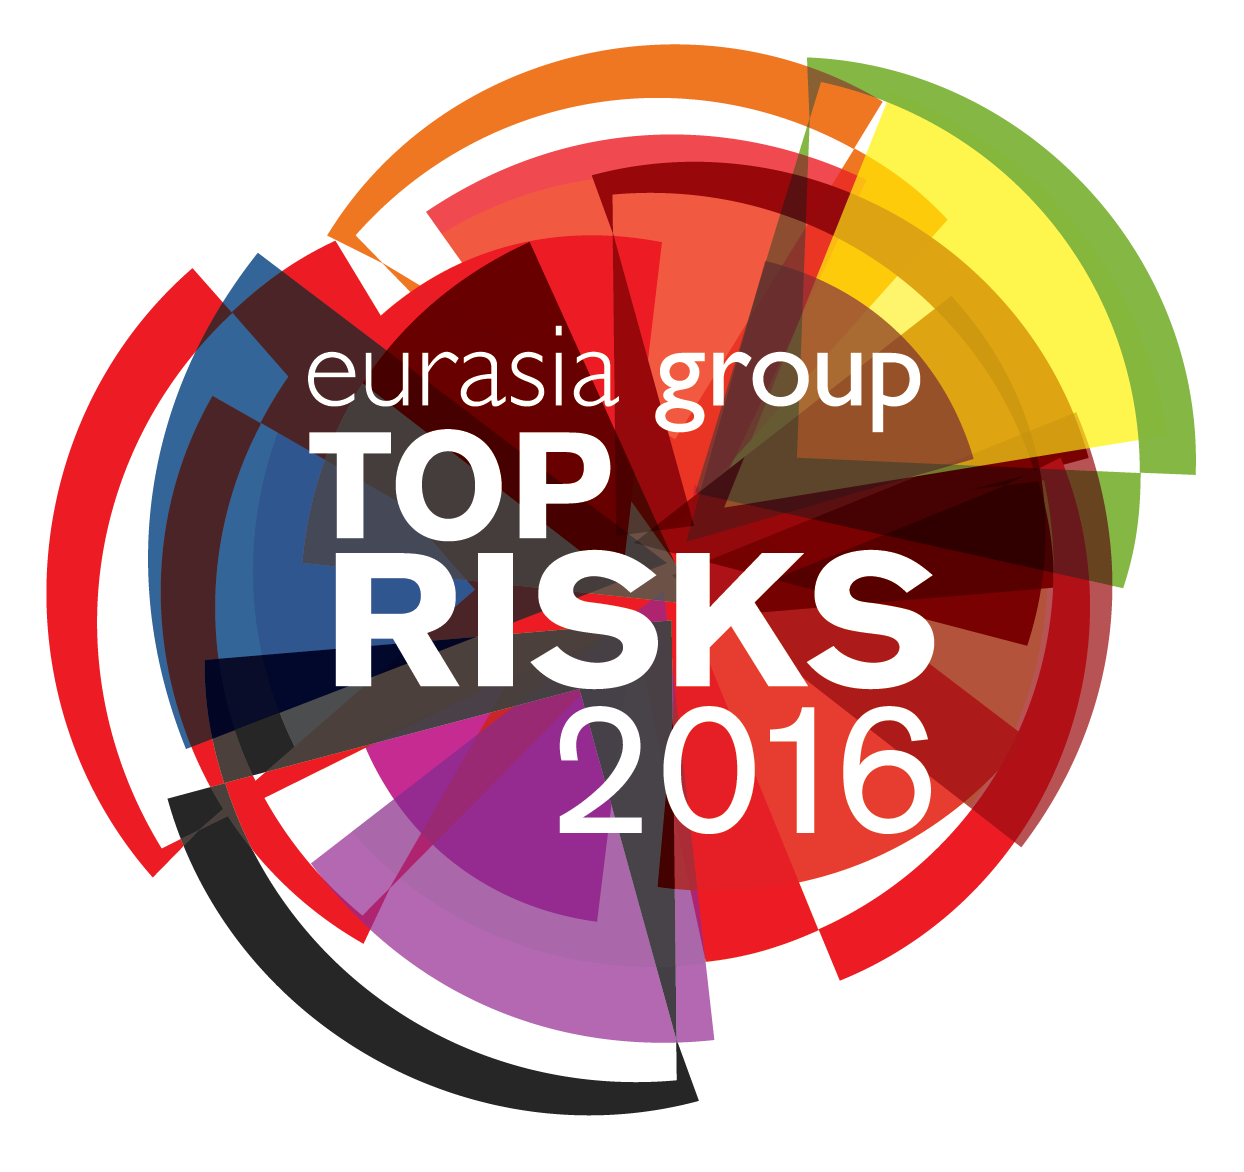 Eurasia Group Publishes Top Risks for 2016